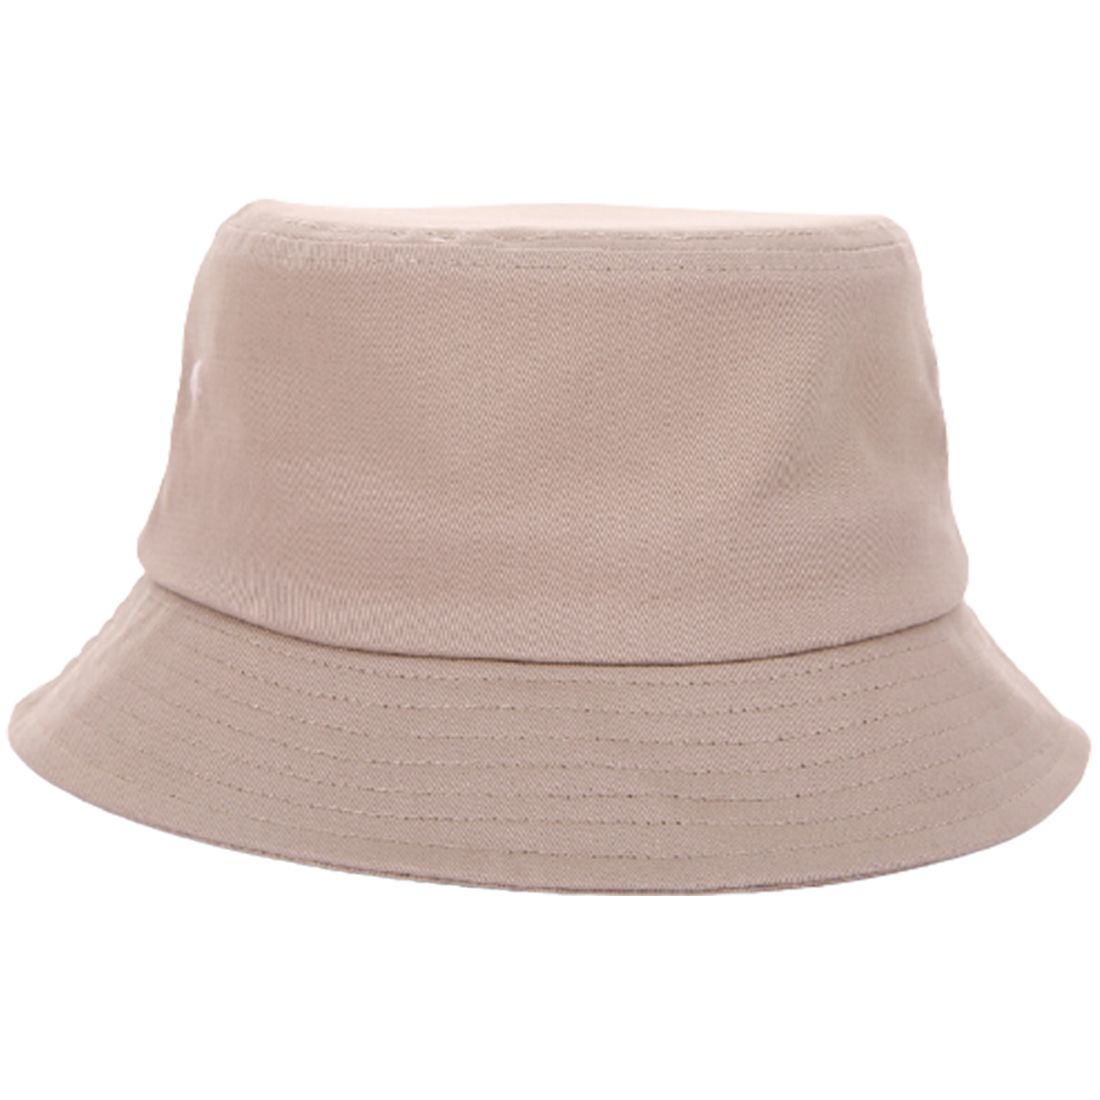 Promotional Cotton Twill Unstructured Bucket Hat